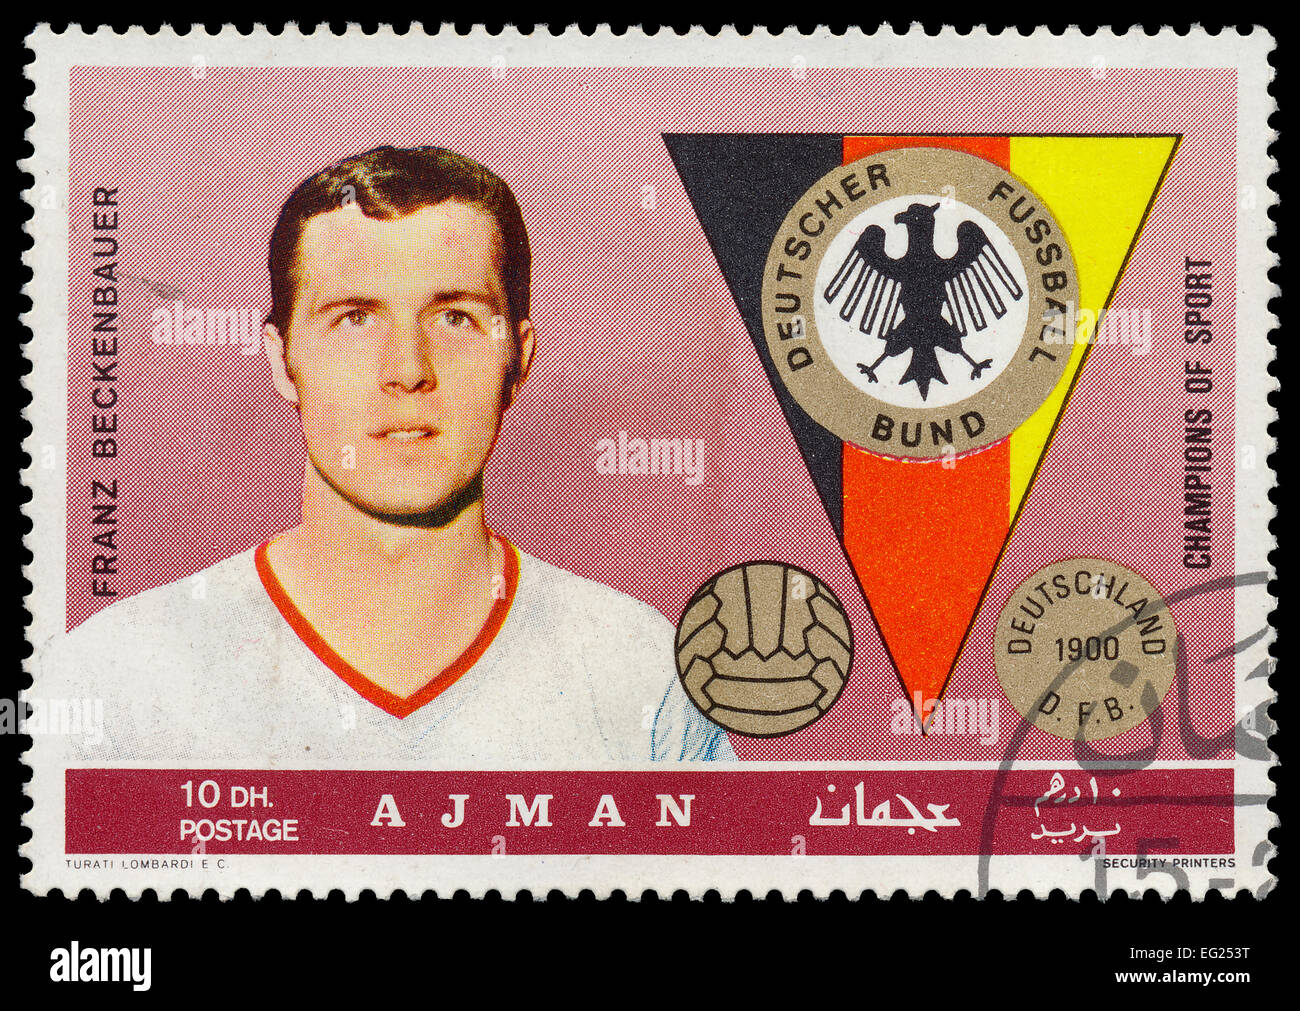 AJMAN - CIRCA 1969: a postage stamp printed in Ajman one of the emirares of the United Arab Emirates showing an image of Franz B Stock Photo